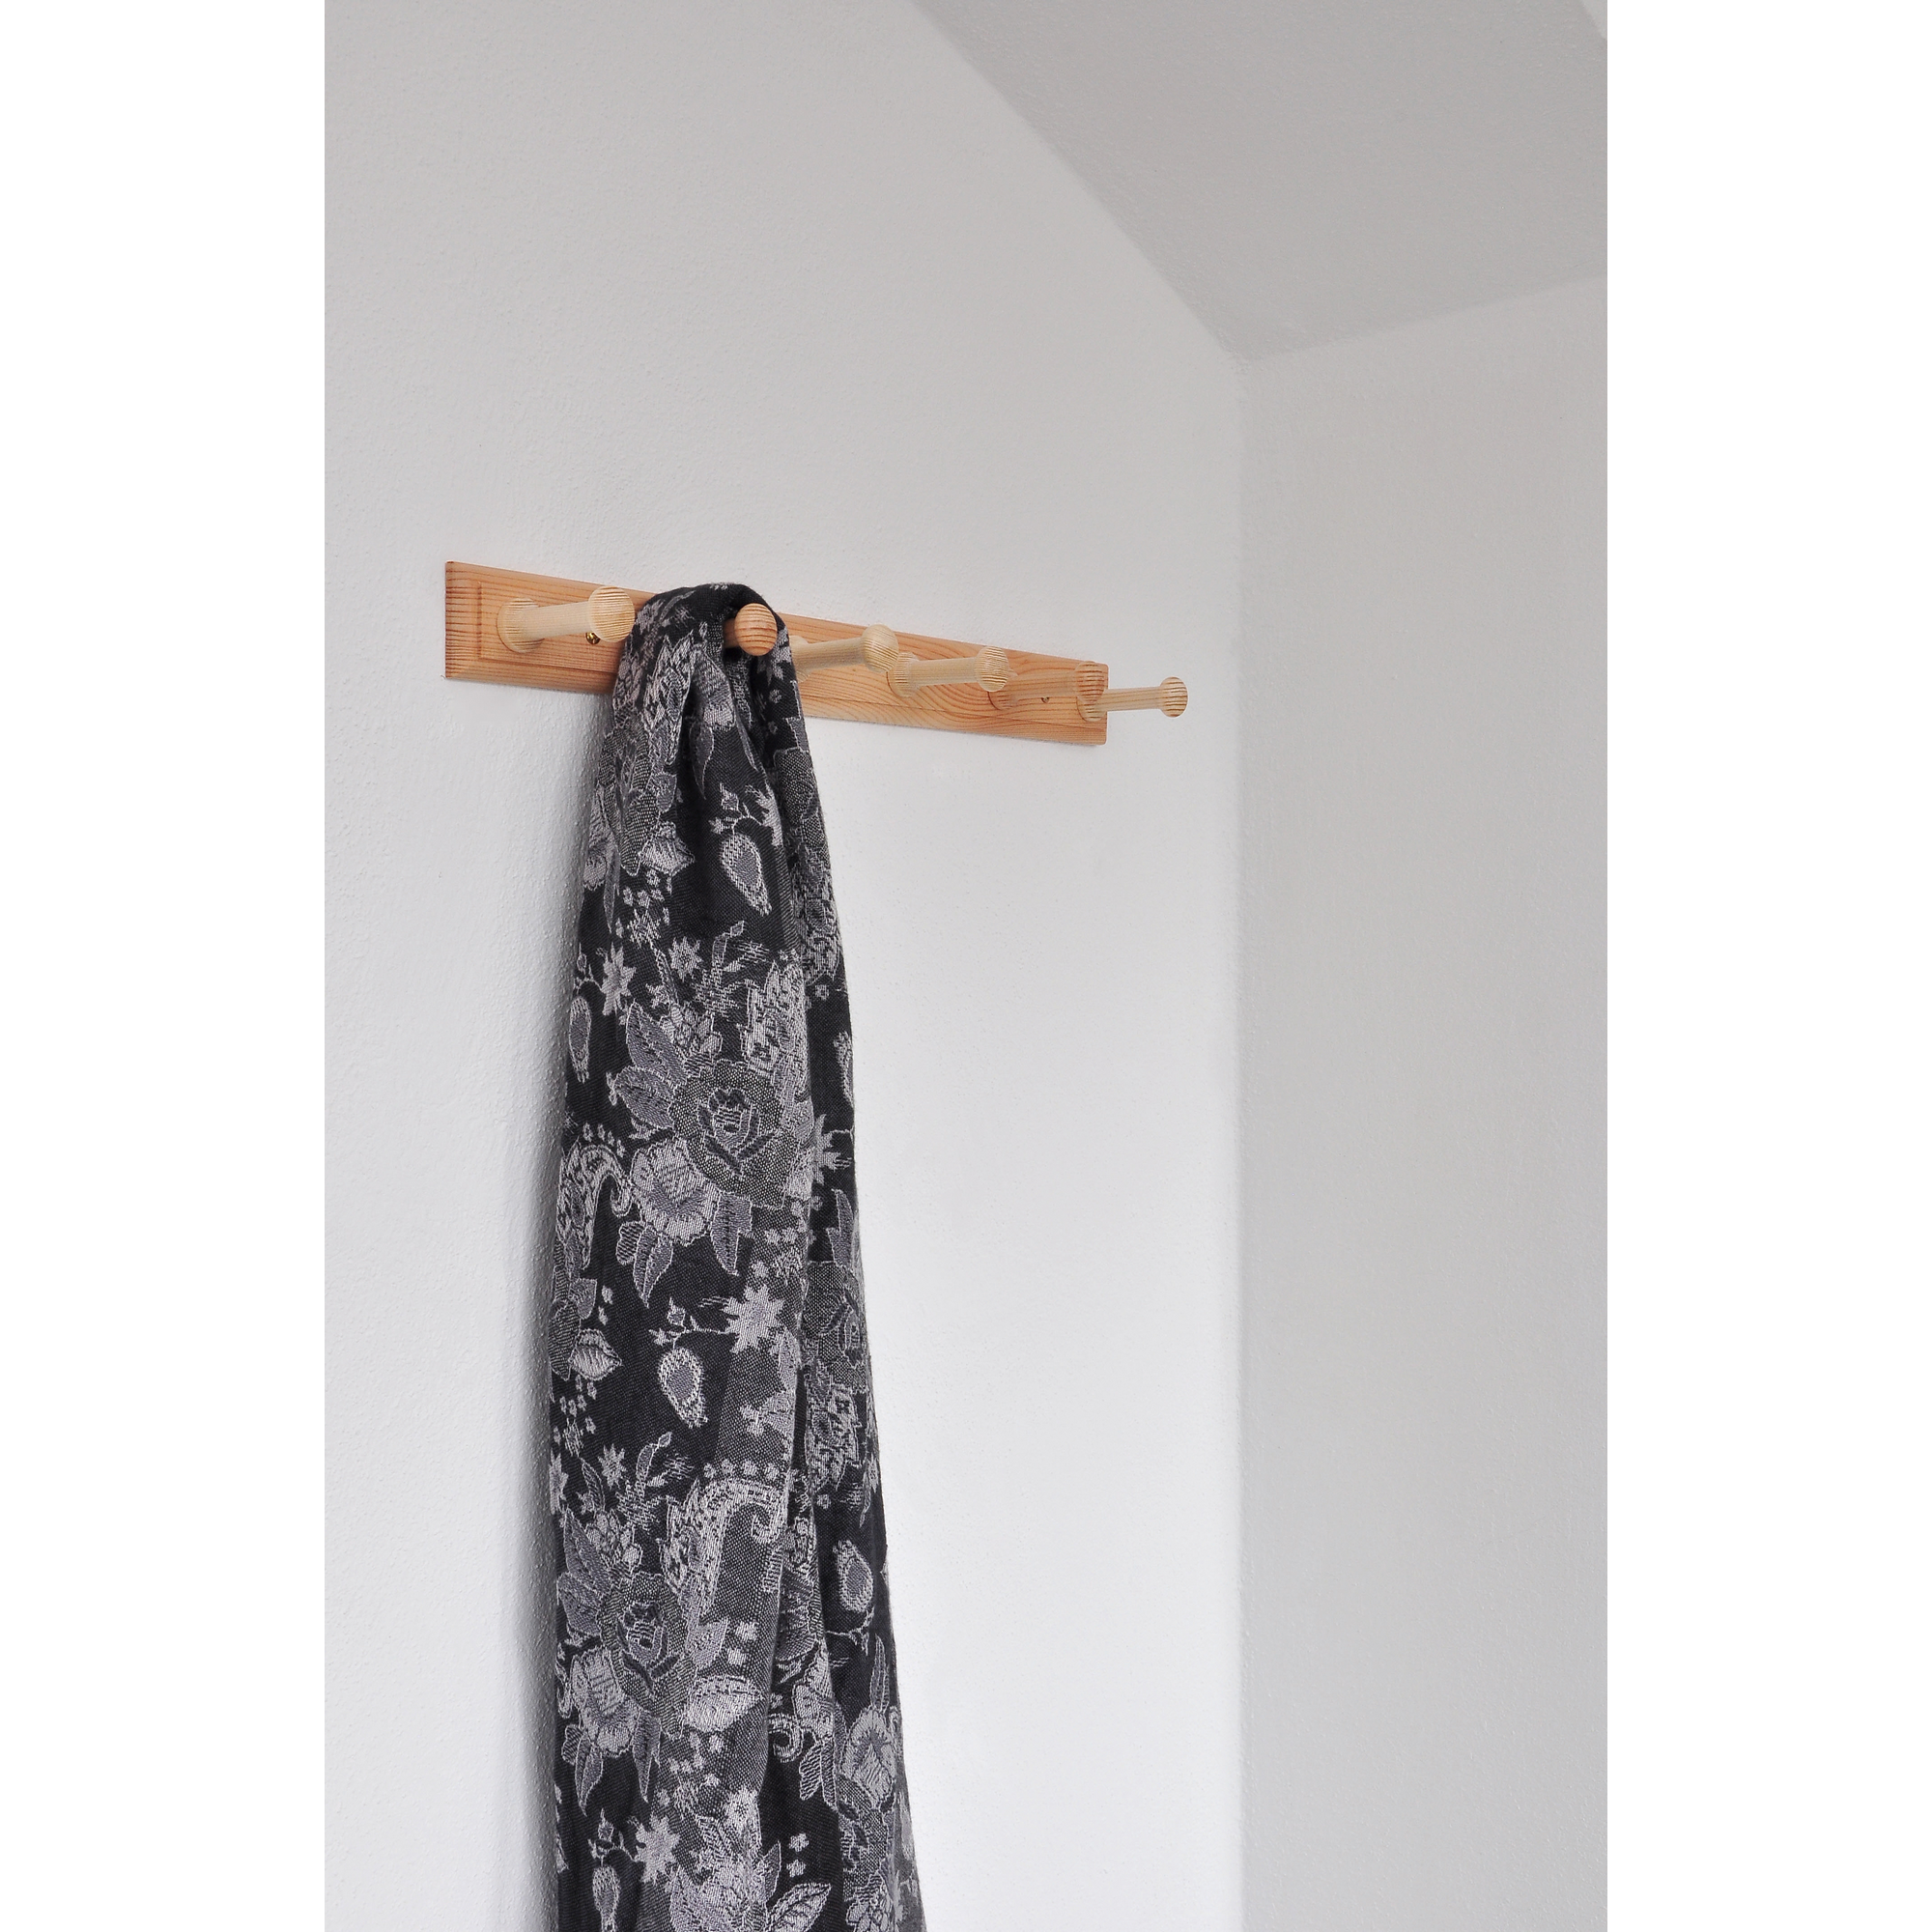 Garderobe Kiefer roh + product picture